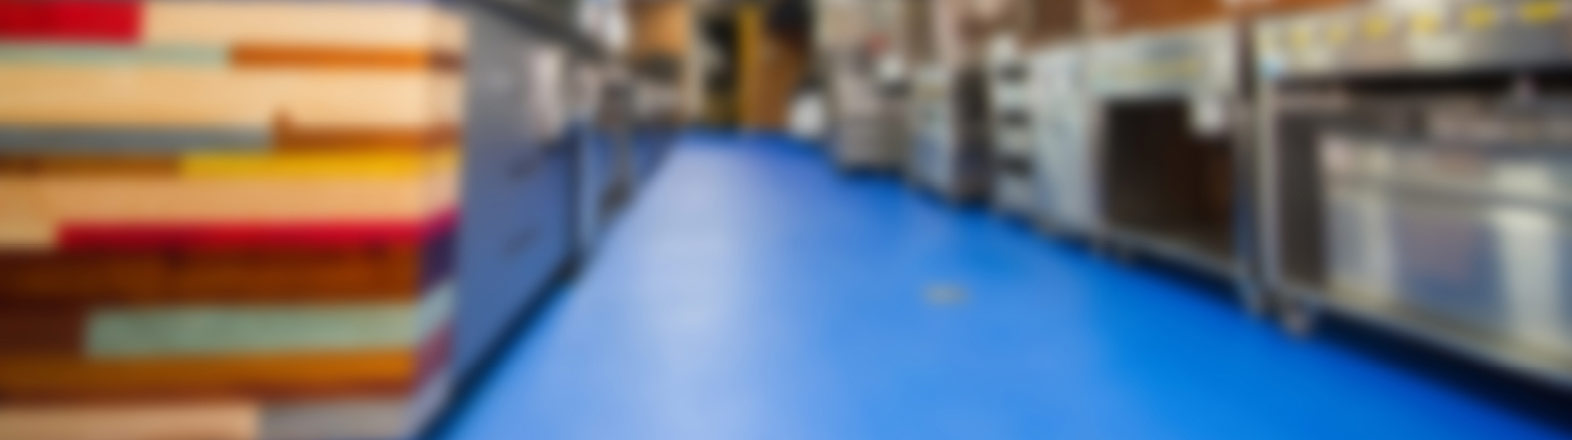 An Interactive Flooring Guide
for Food and Beverage
Production Facilities